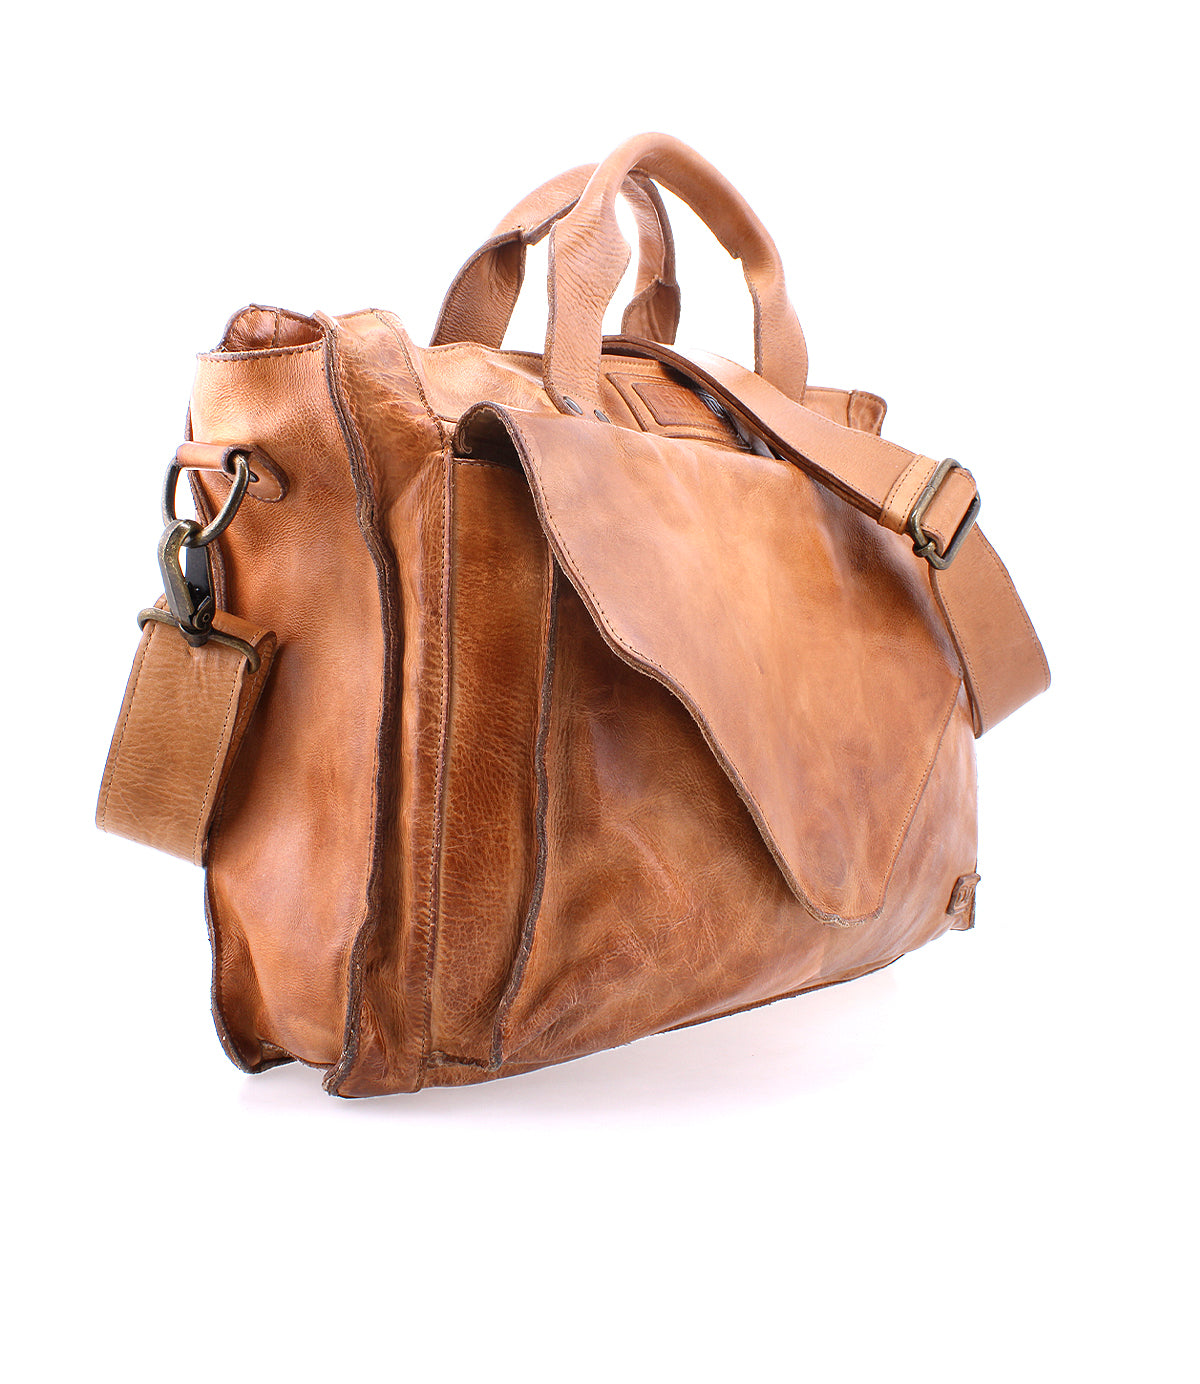 A Depp bag by Bed Stu, made of tan leather with a shoulder strap for belongings.